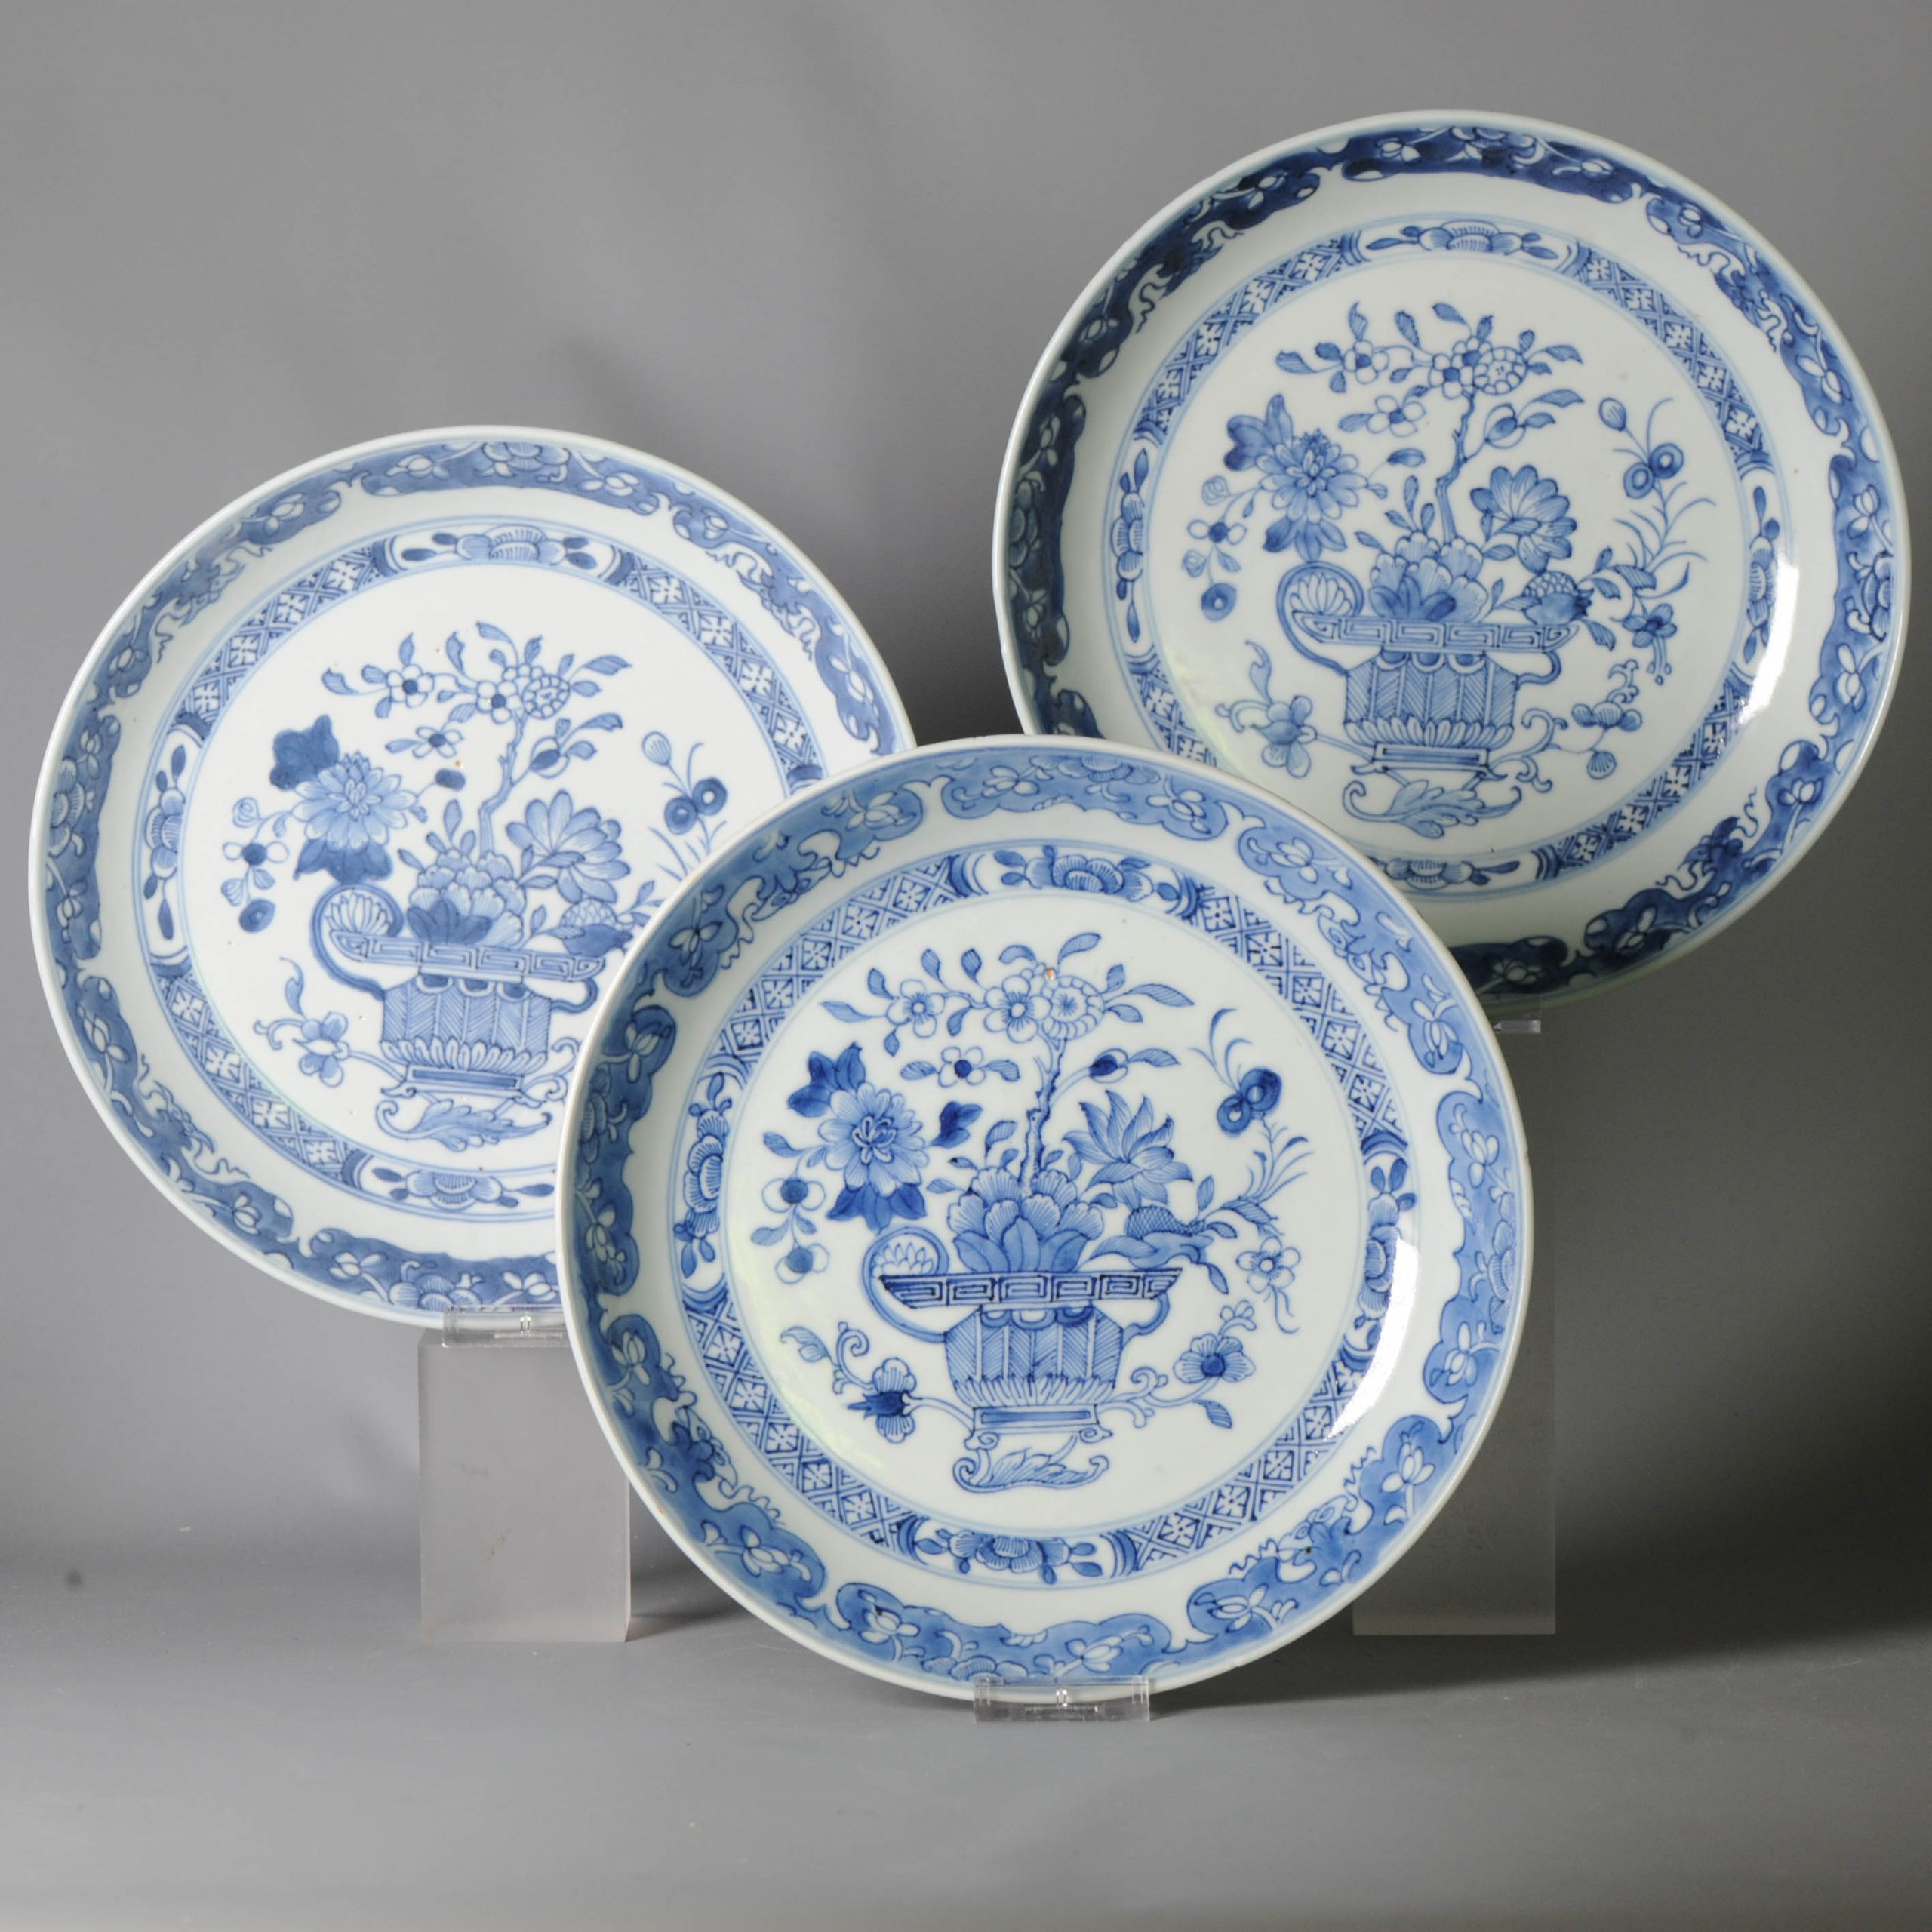 #3 Antique Chinese Porcelain 18th C Qing Period Blue White Set Dinner Plates